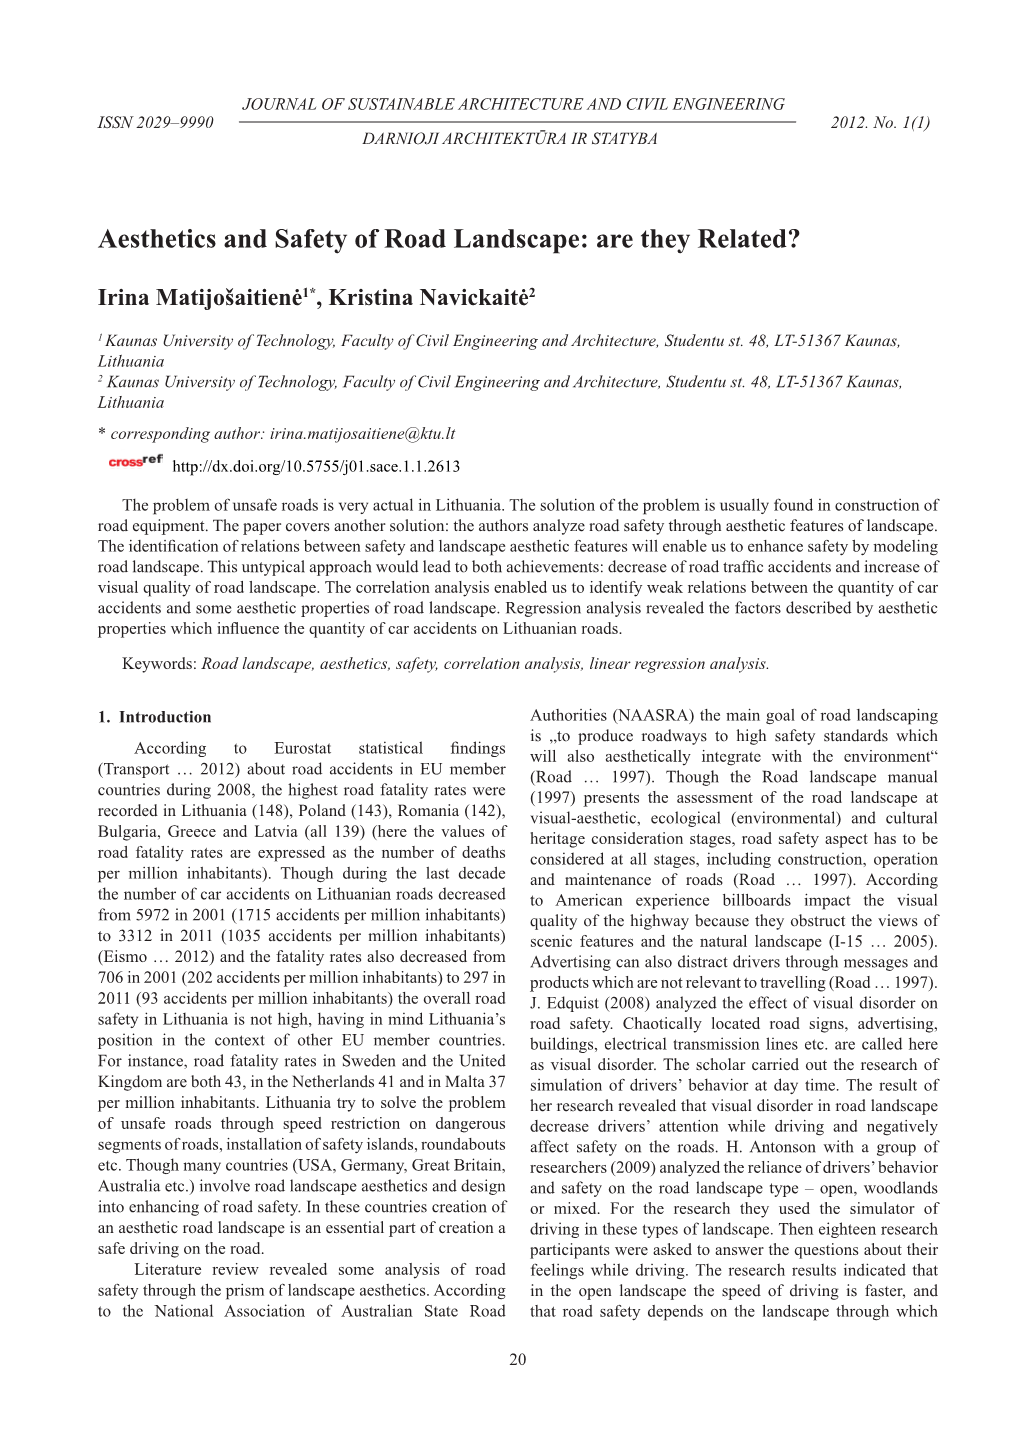 Aesthetics and Safety of Road Landscape: Are They Related?